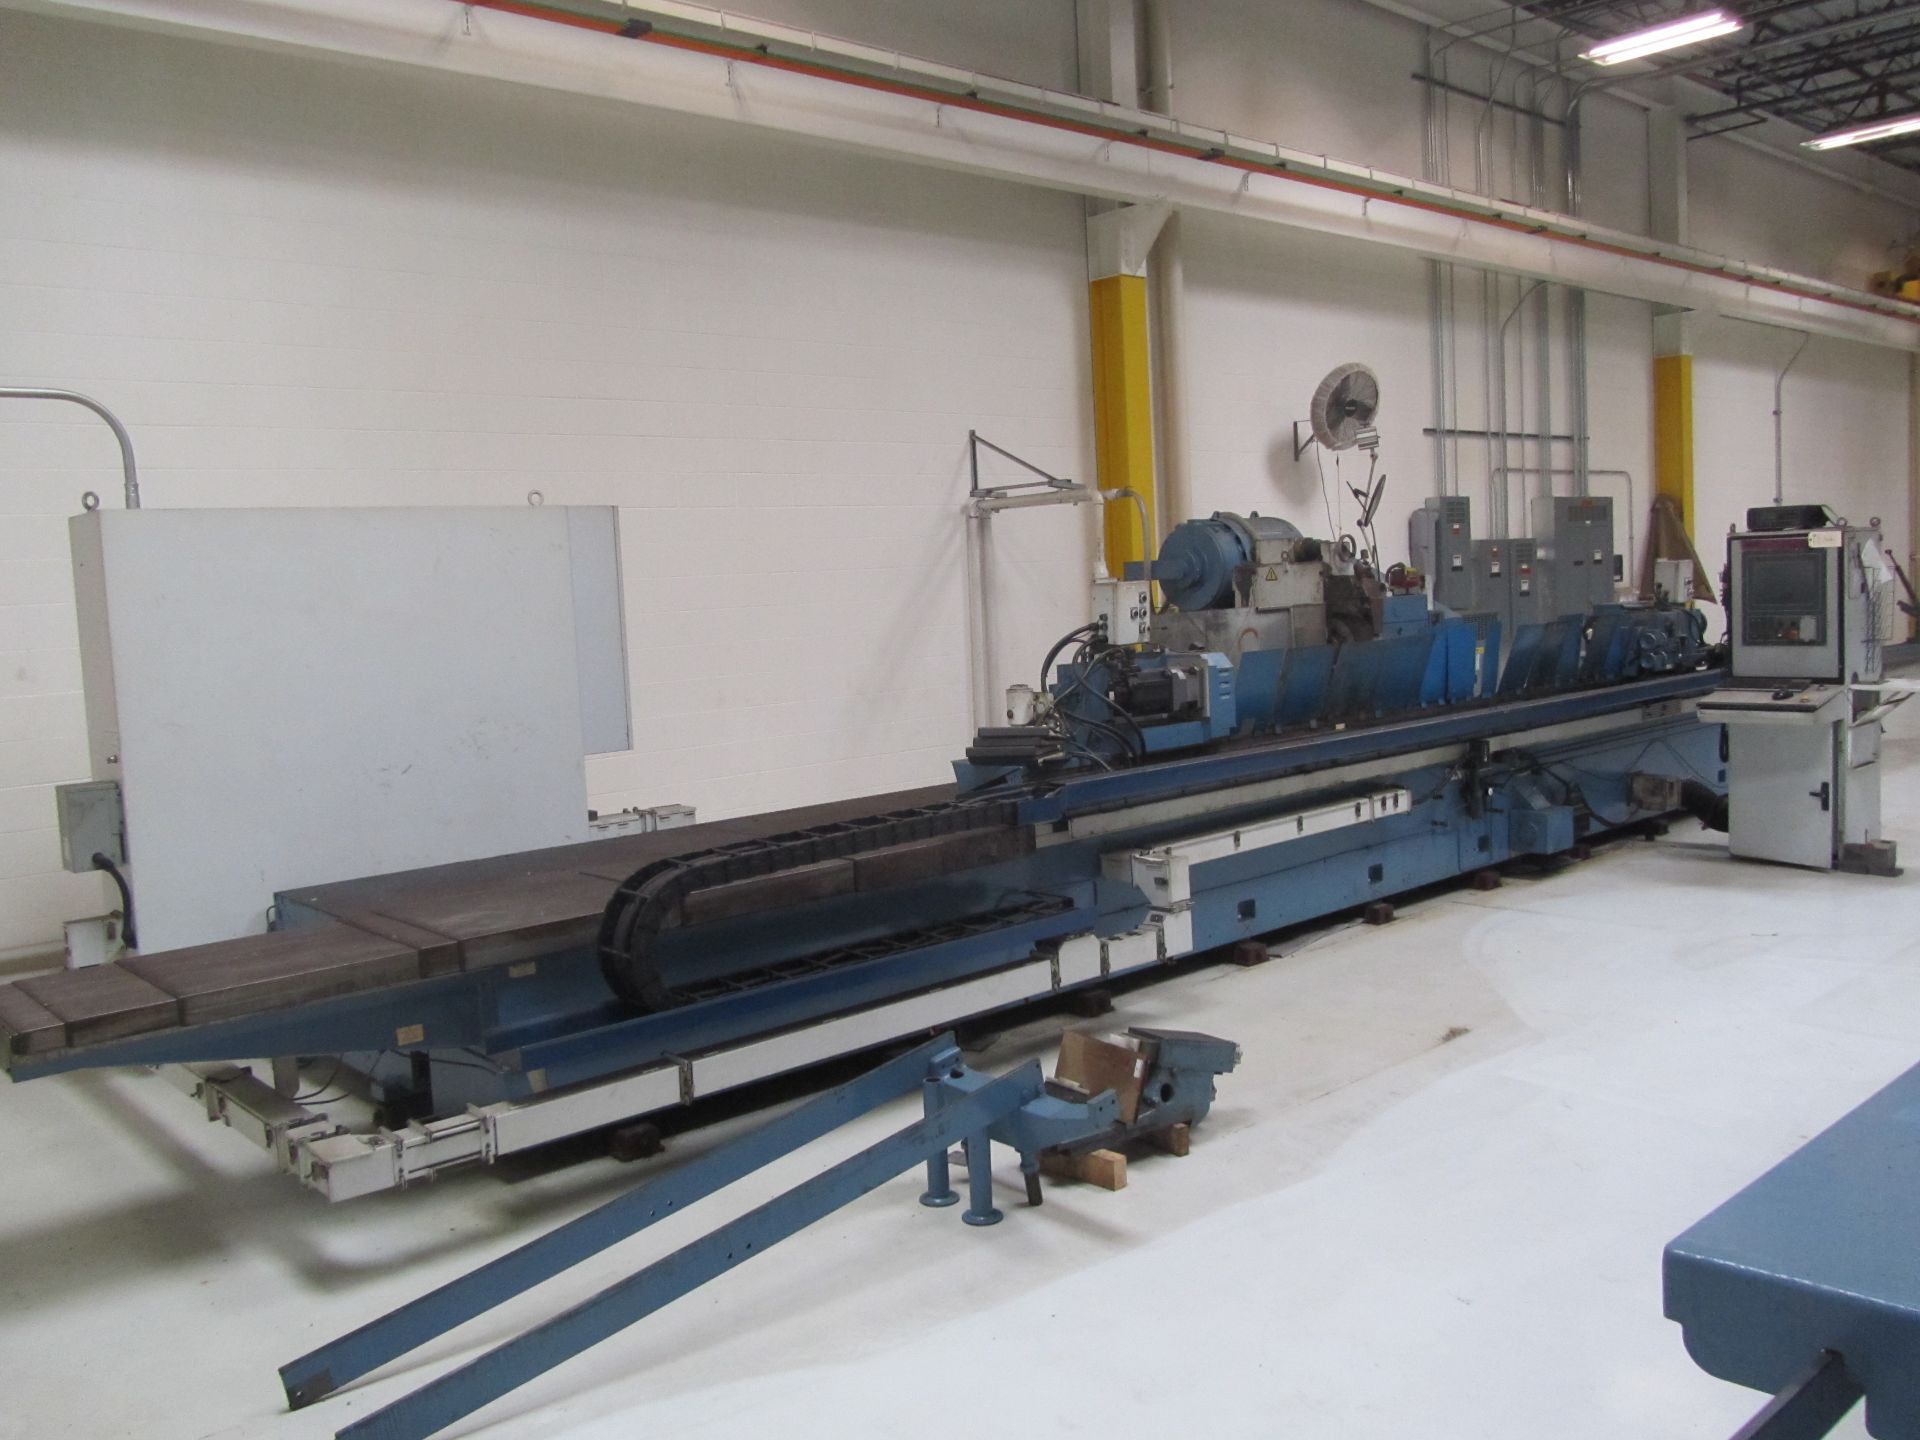 Naxos-Union RTLDQY CNC-S 26'' x Approx 156'' CNC Cylindrical/Roll Grinder - Image 2 of 12